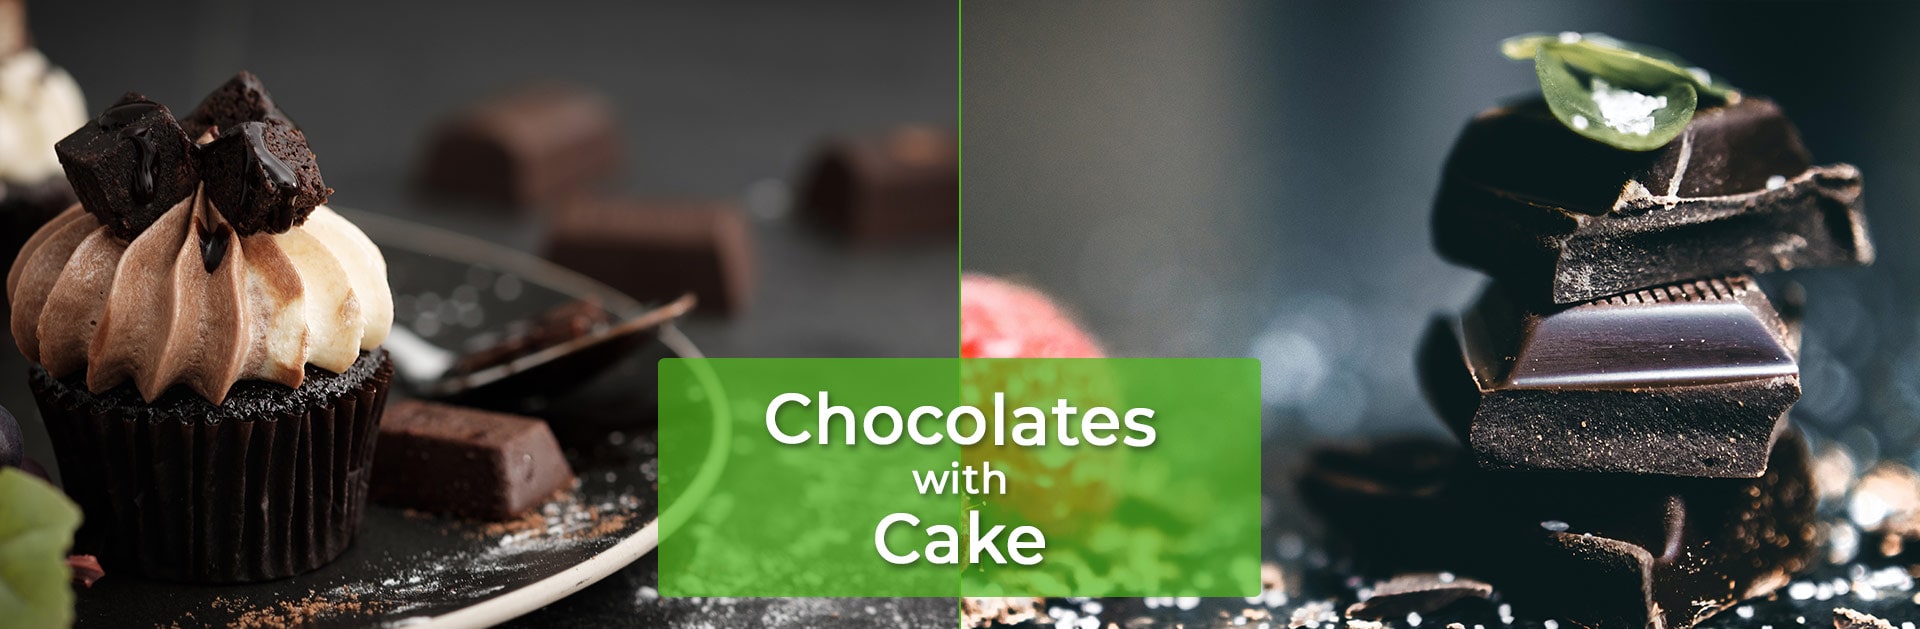 natural chocolate and cake Banner